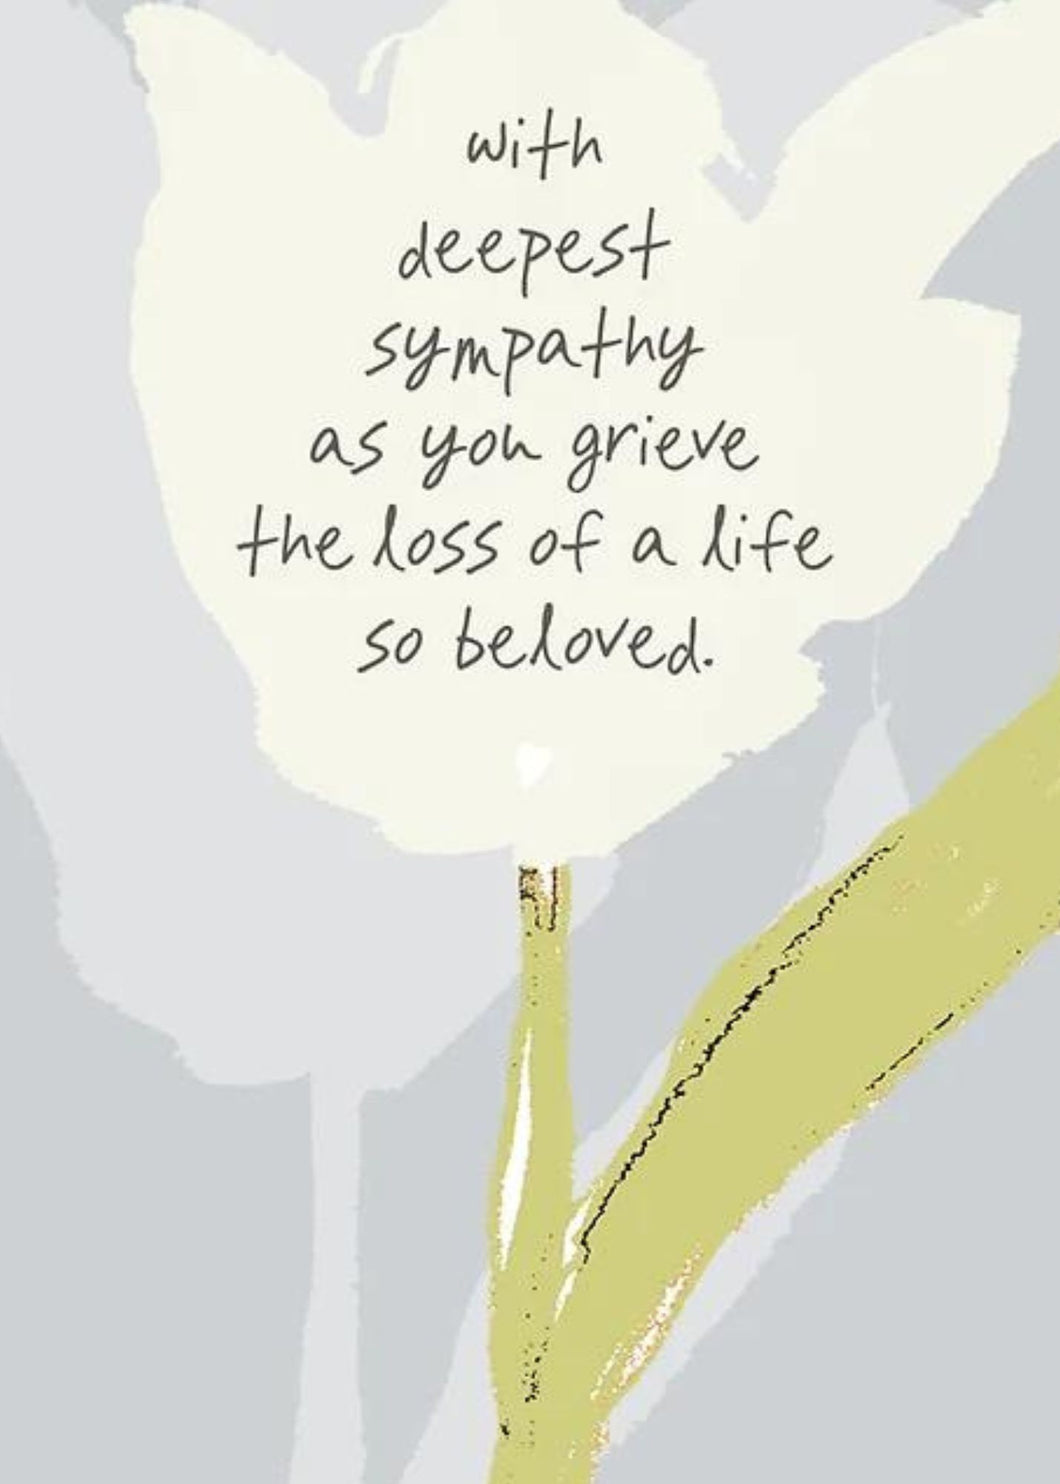 SYMPATHY CARD - The Loss of a Life so Beloved